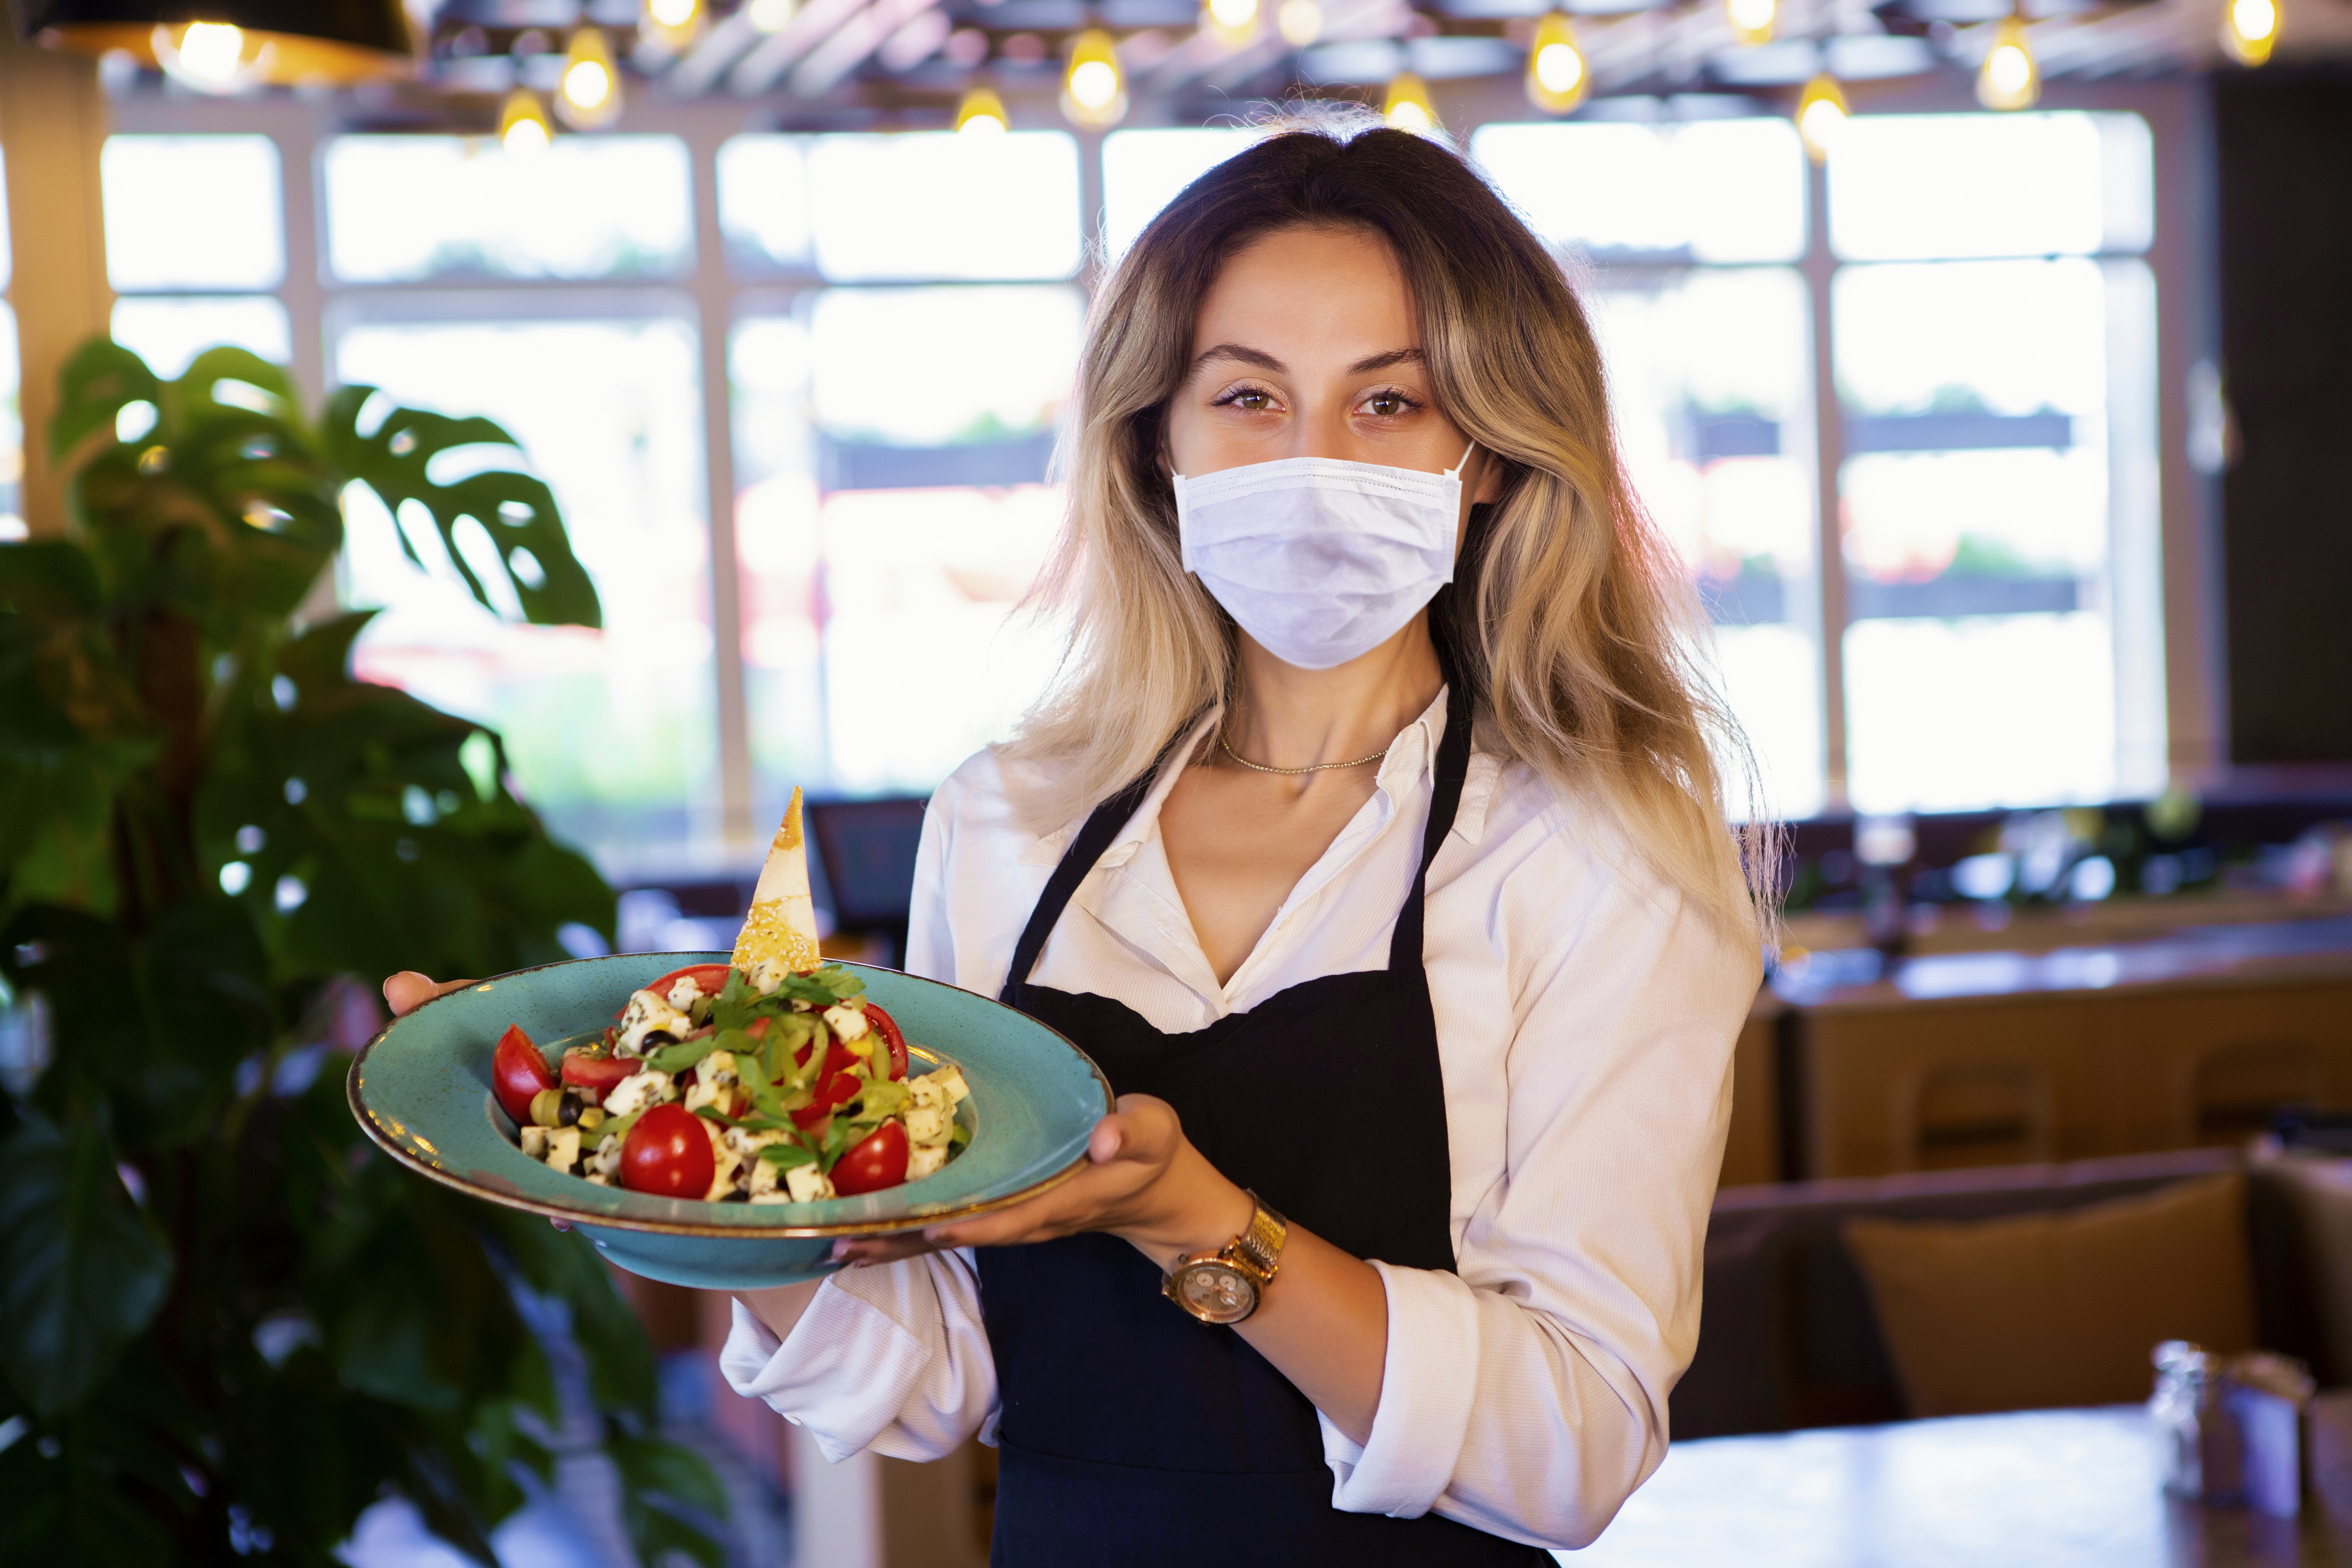 Restaurant server holding a plate and wearing a mask.